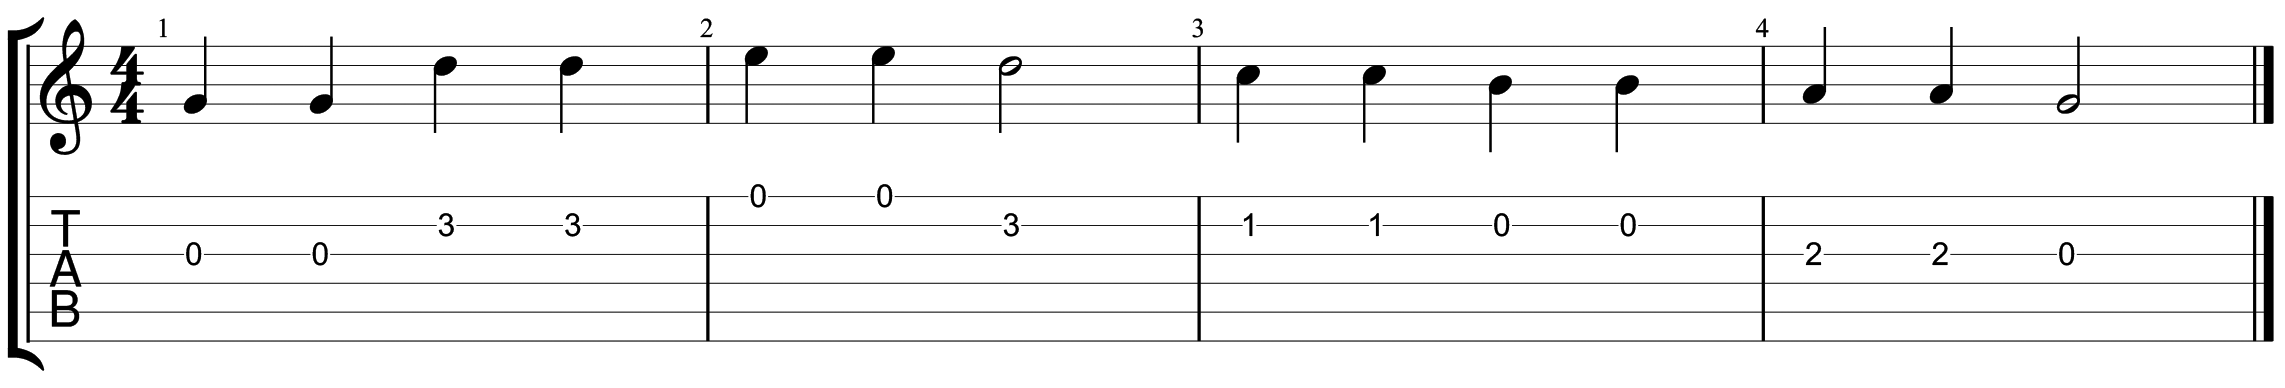 How to read guitar tab 6